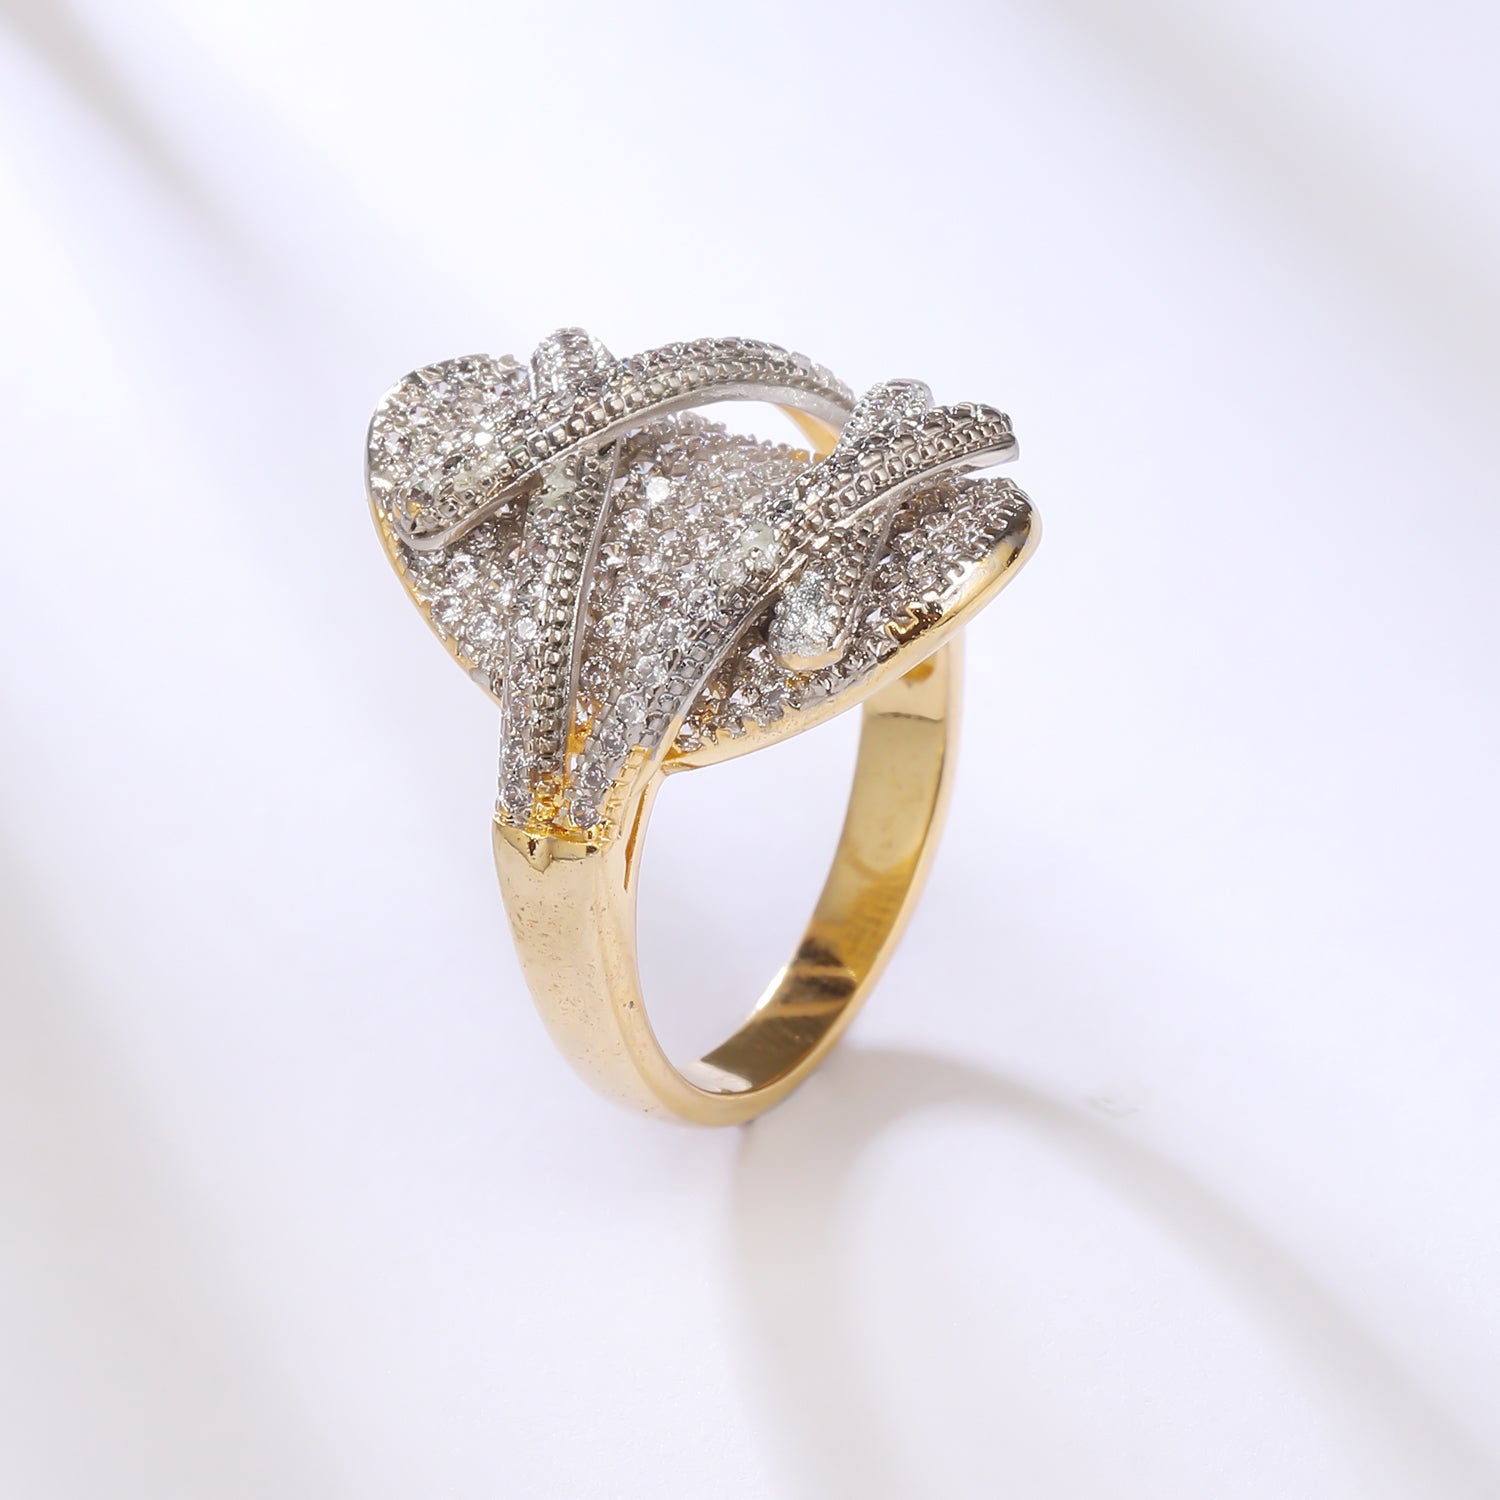 Gold Rings | Check Gold Ring Design Online – GIVA Jewellery